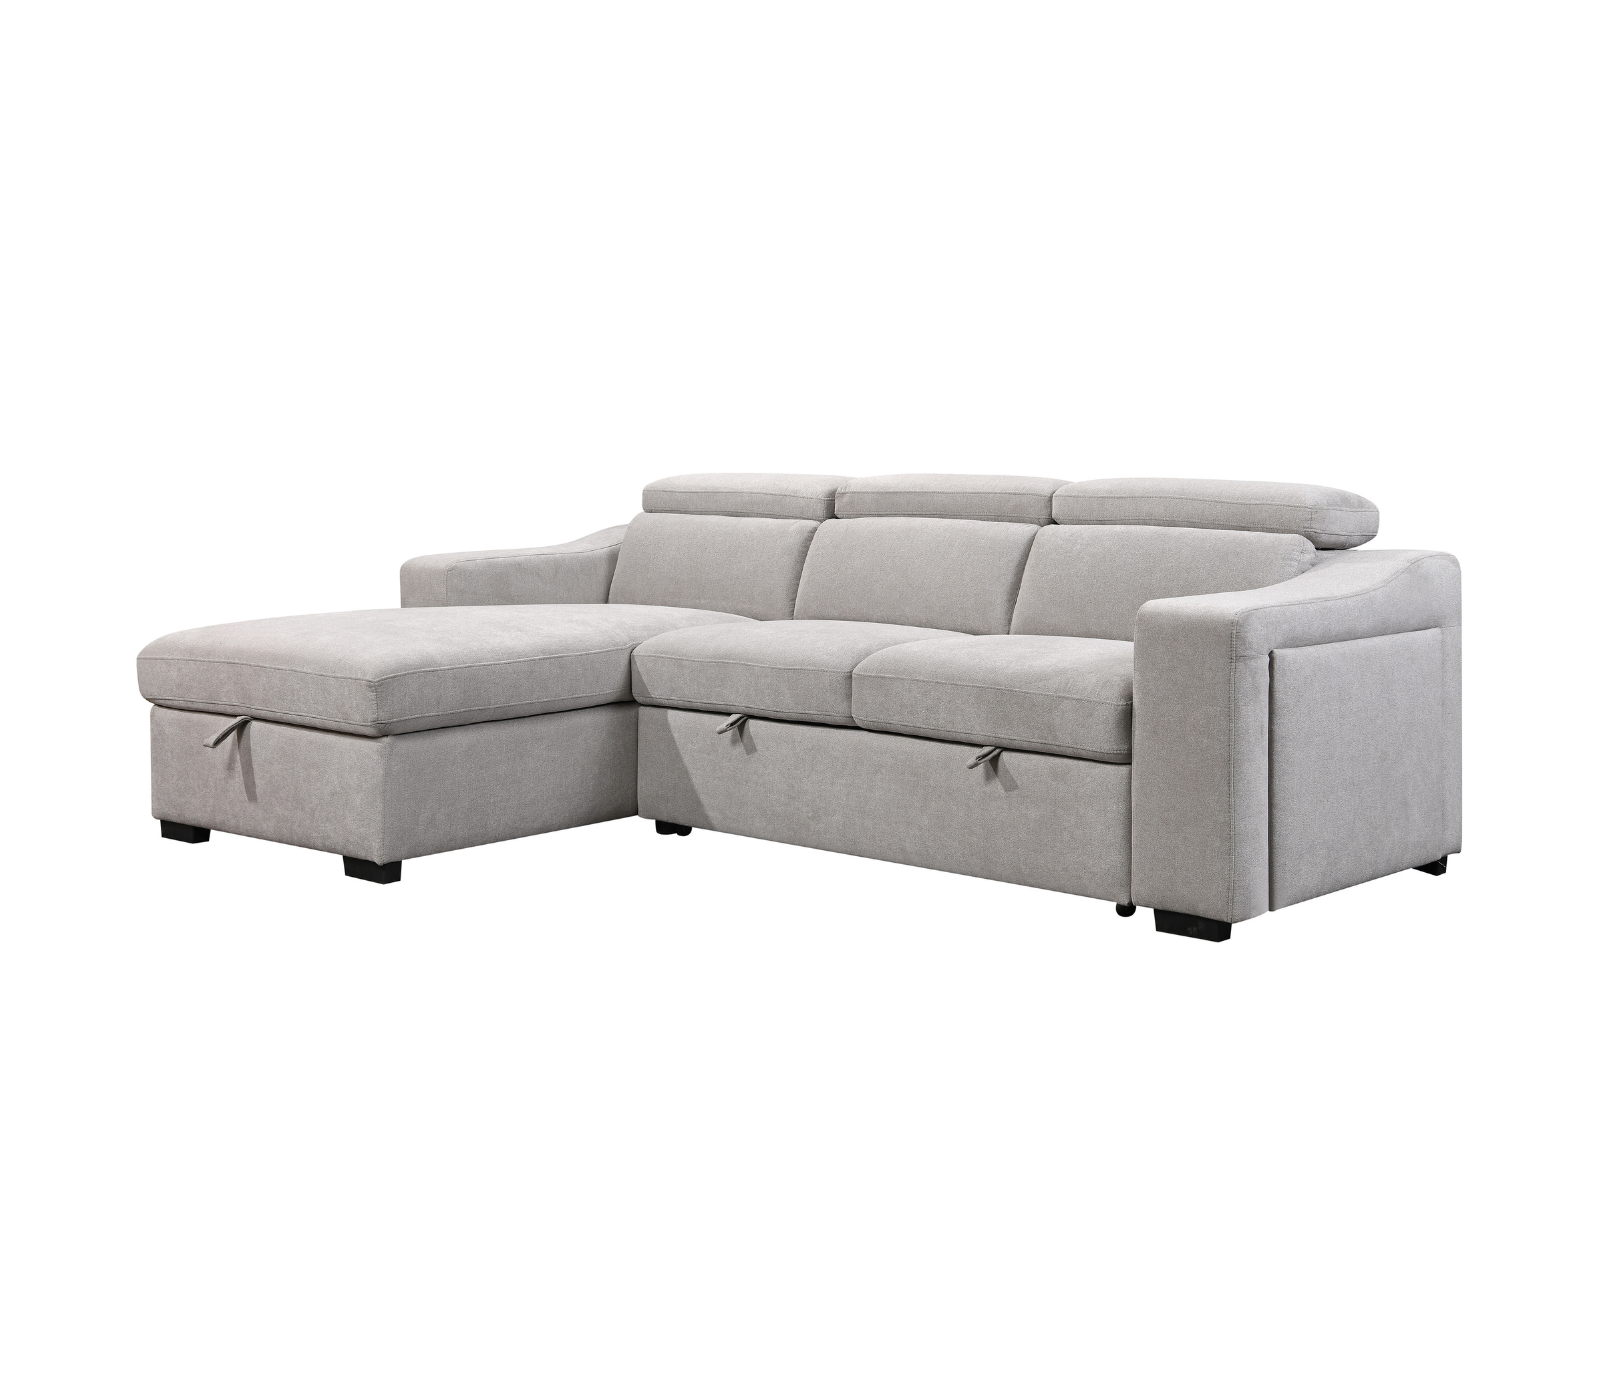 Roxy 2 Piece Sectional w/ Pull-Out Sleeper - Light Taupe Fabric